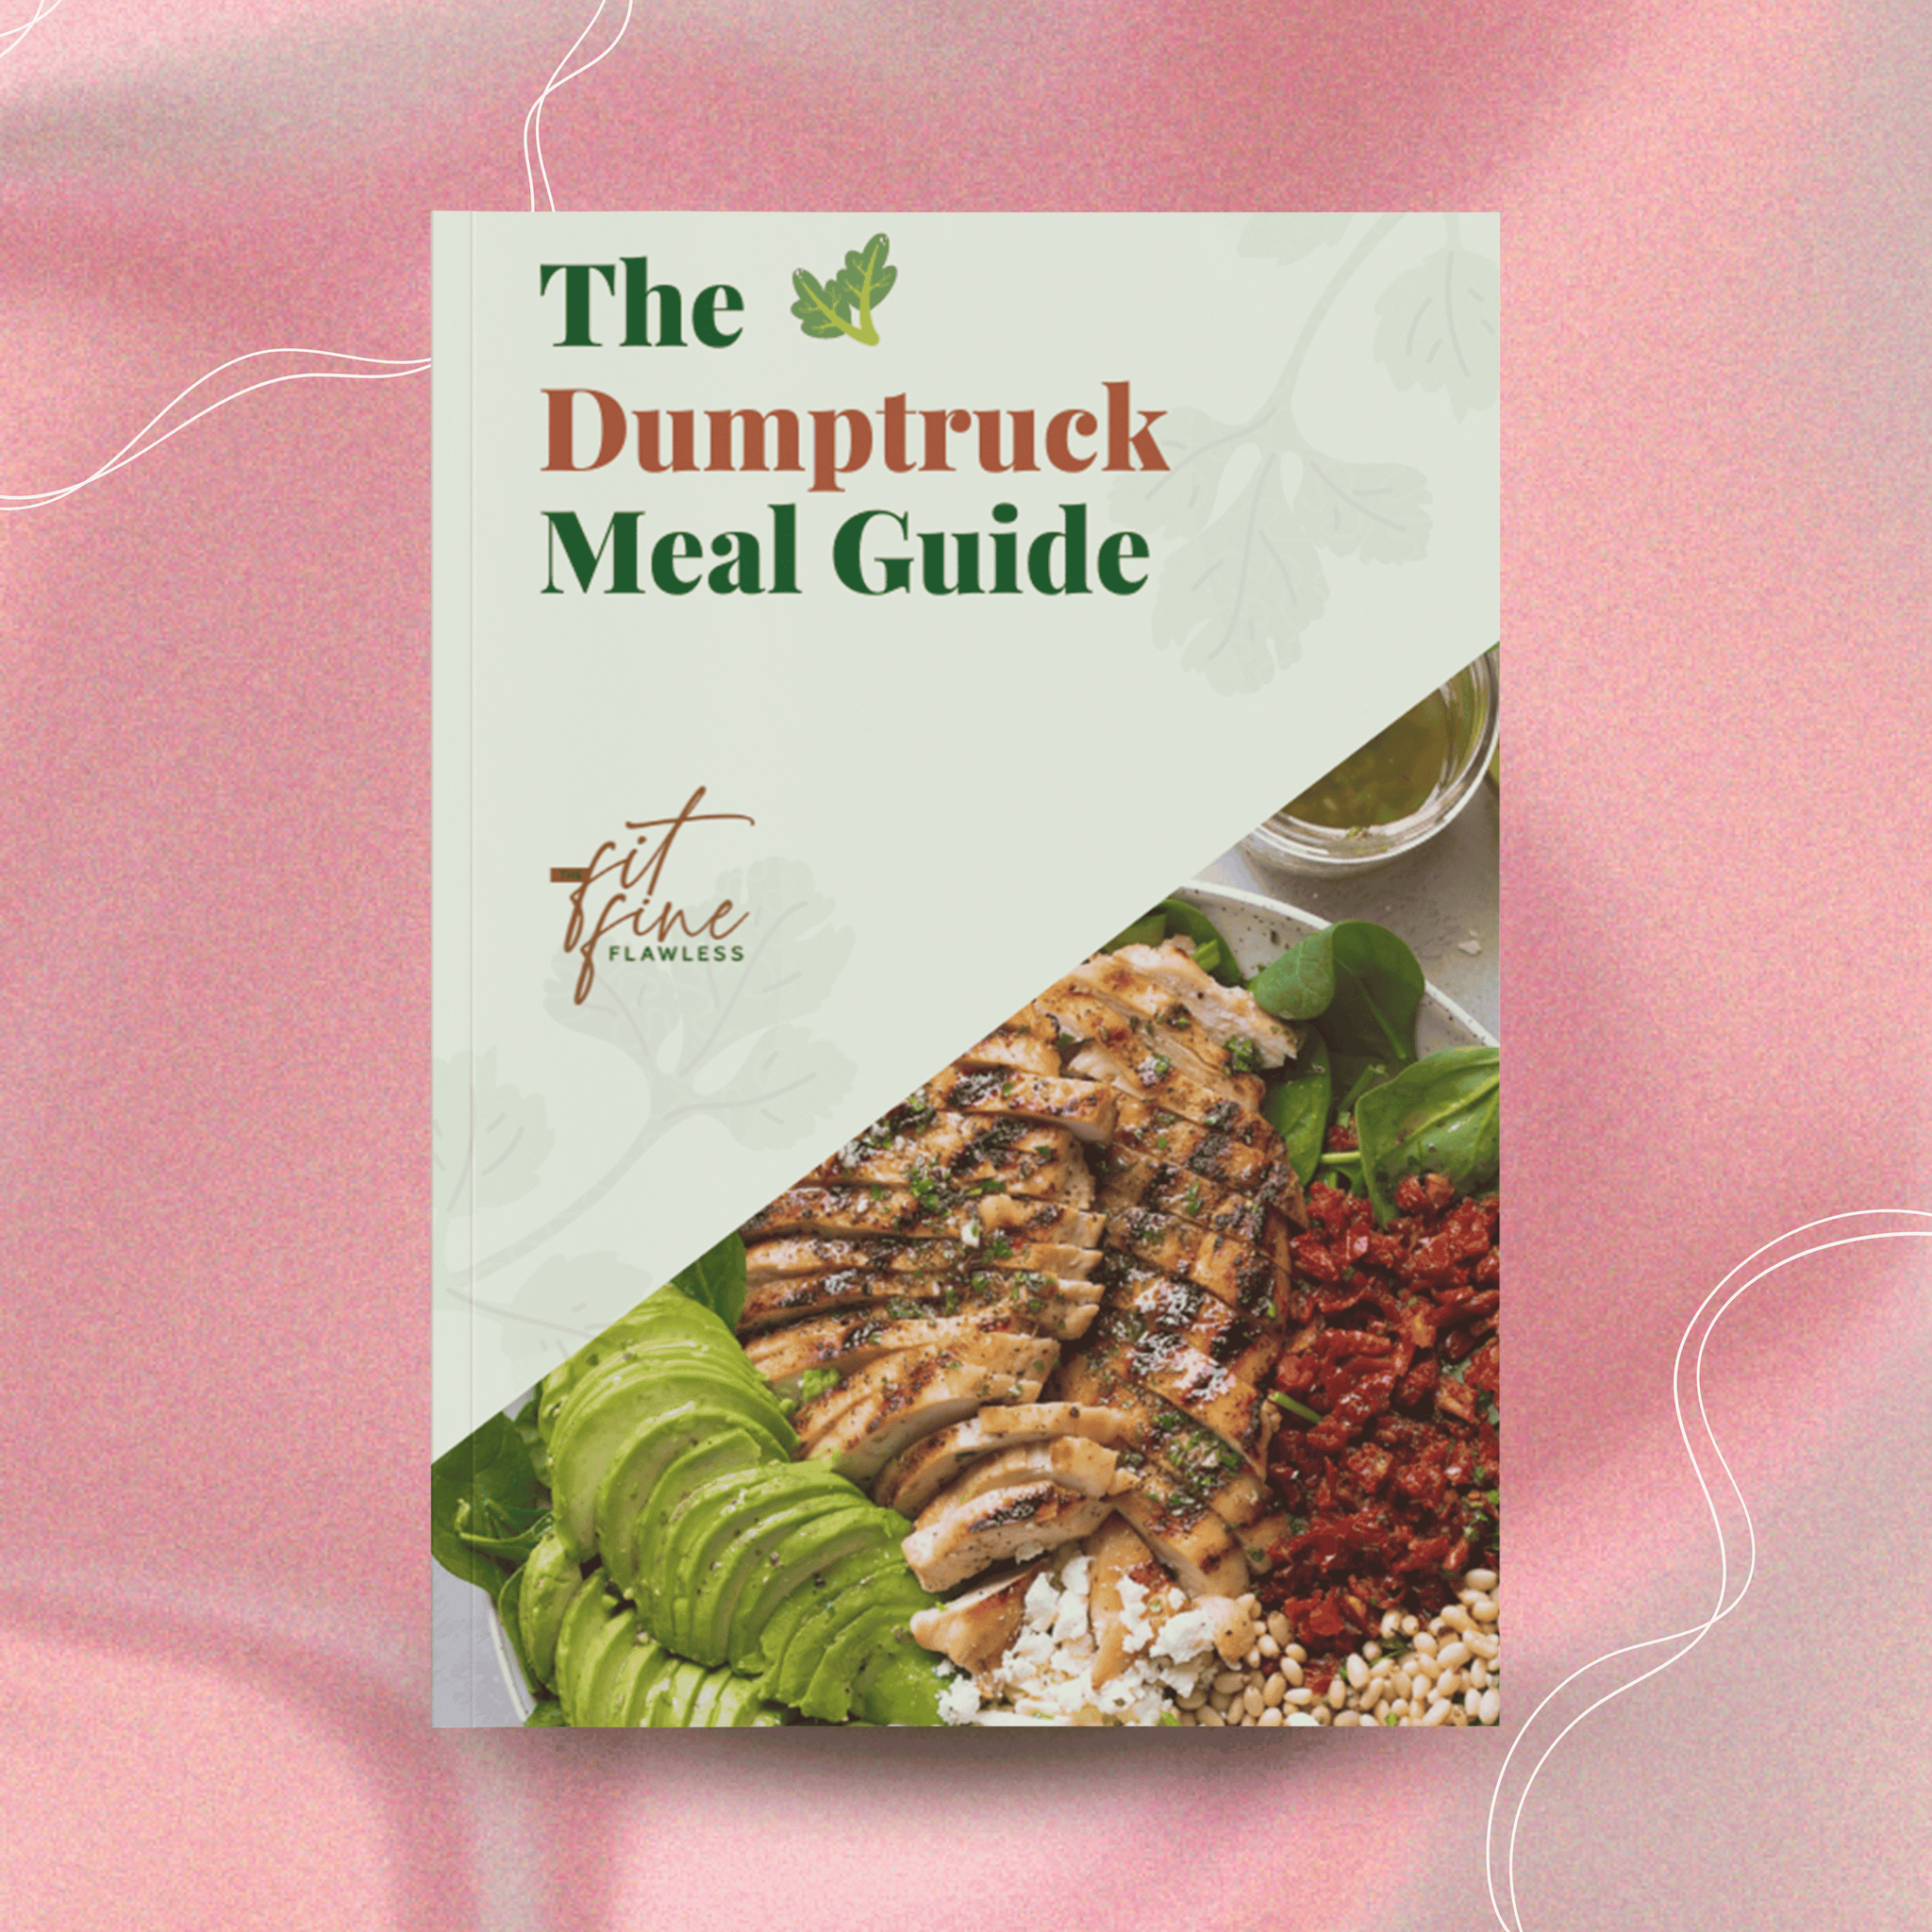 The Dumptruck Meal Guide